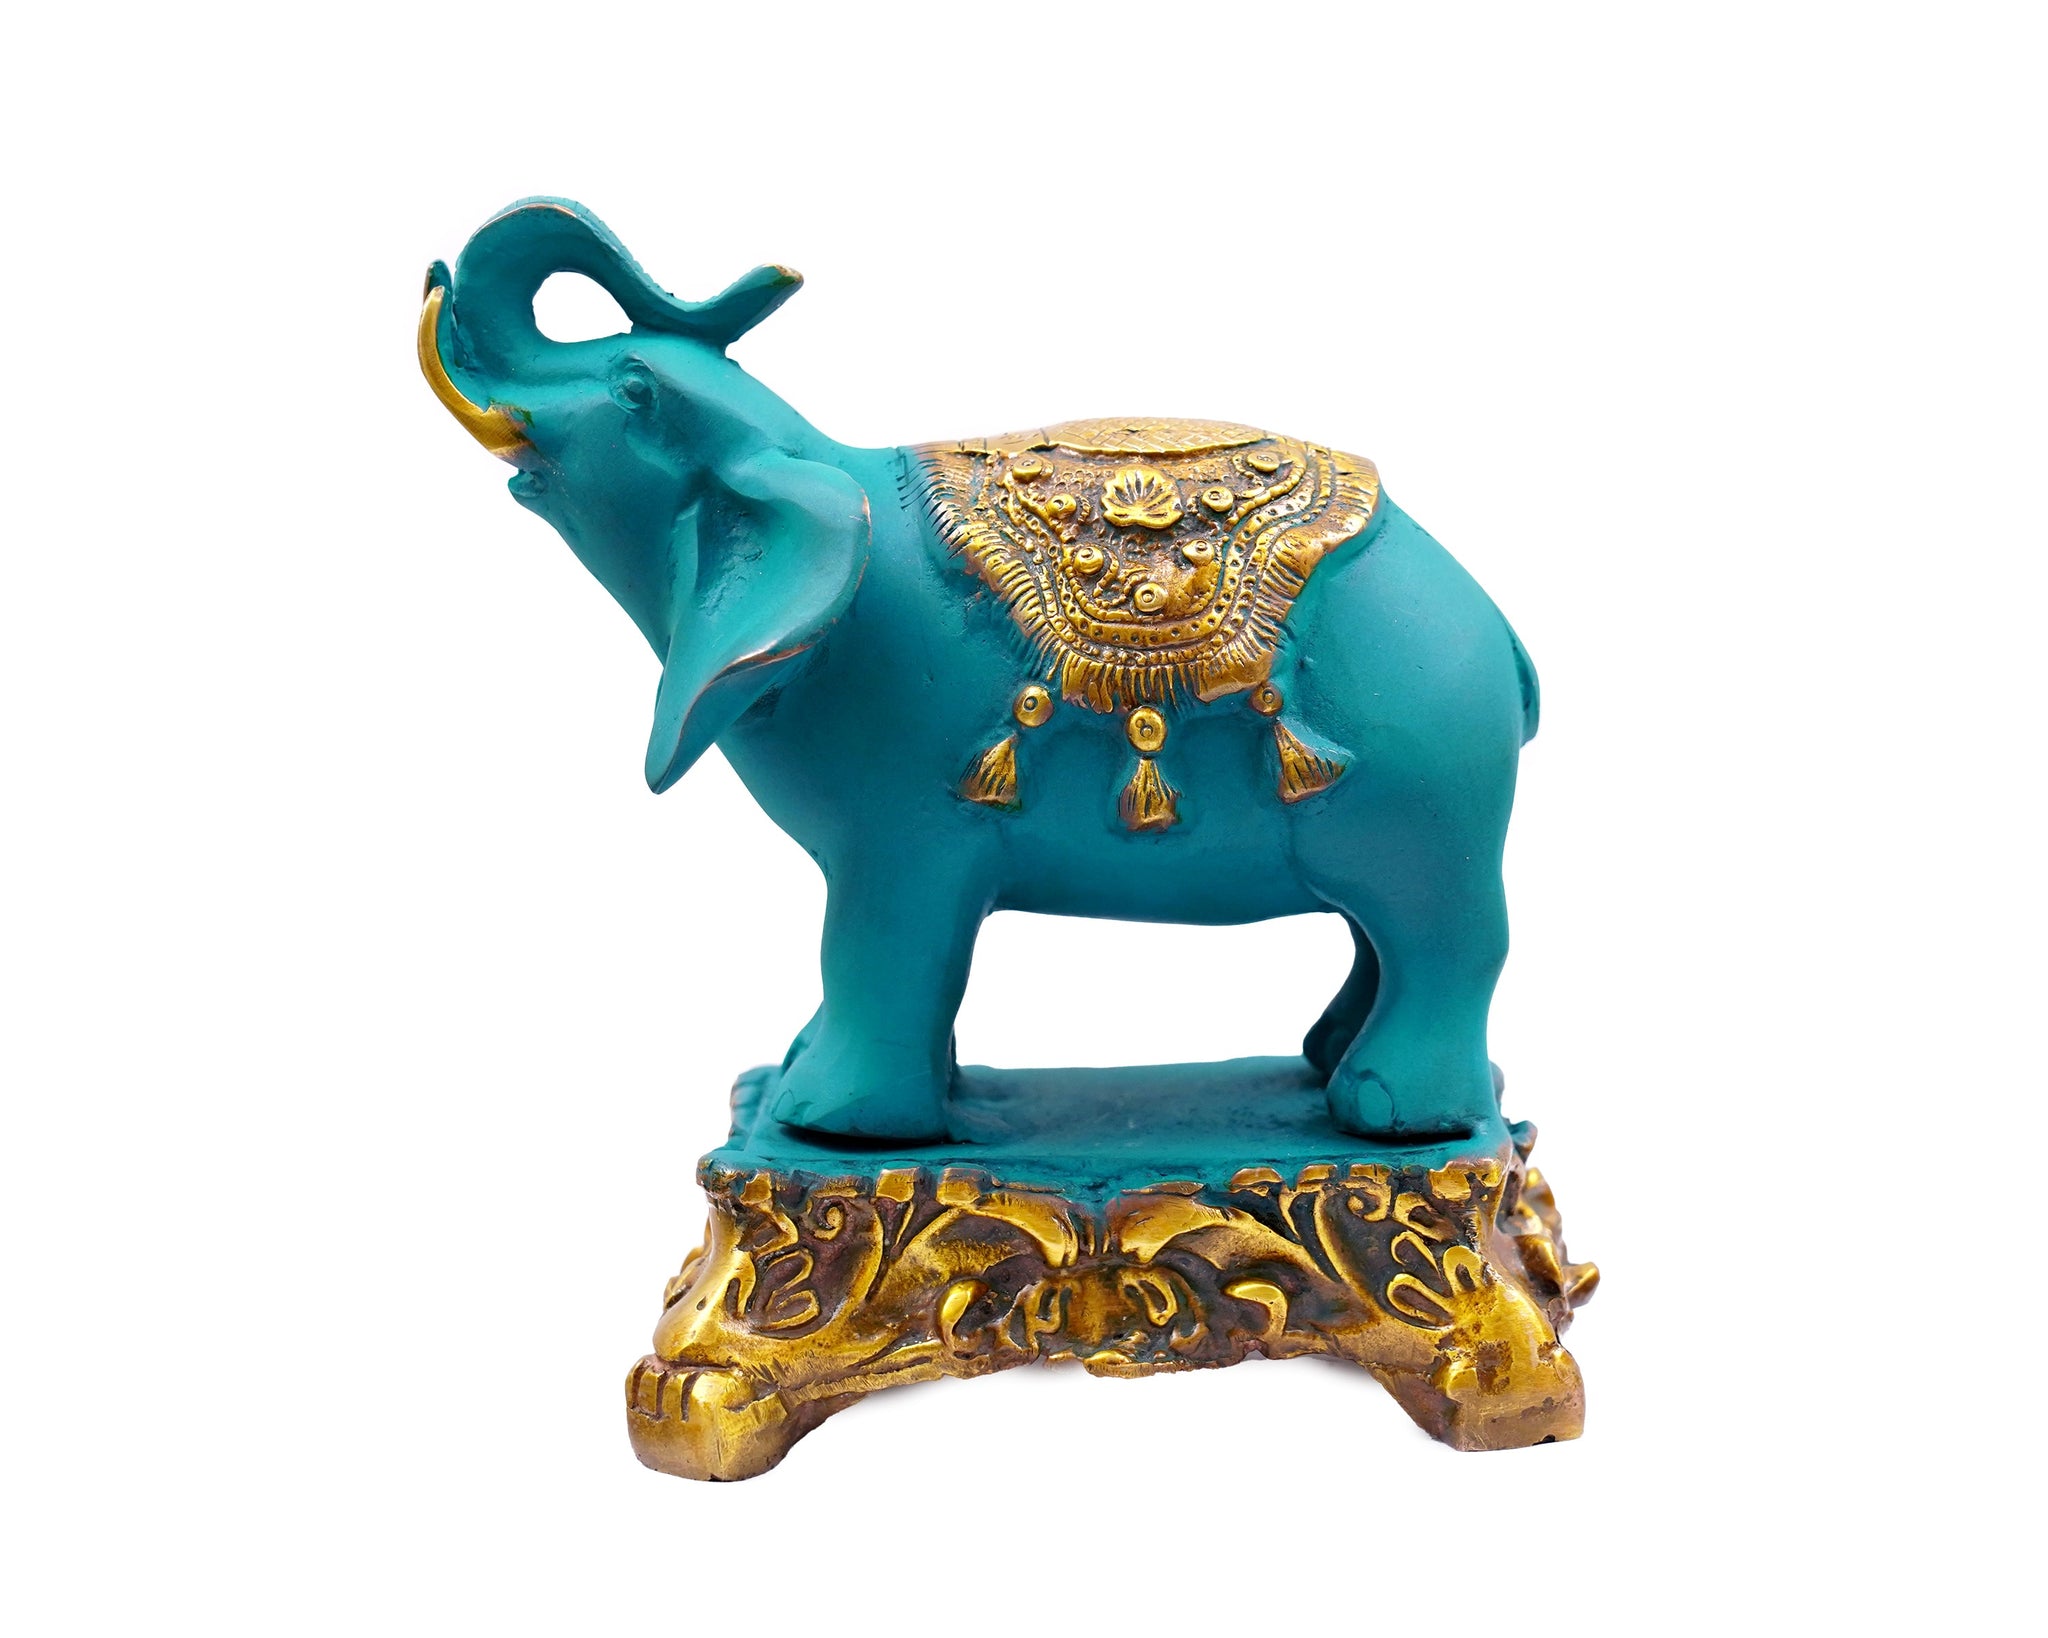 Perfect Ganesha Murti Gifts based on Materials